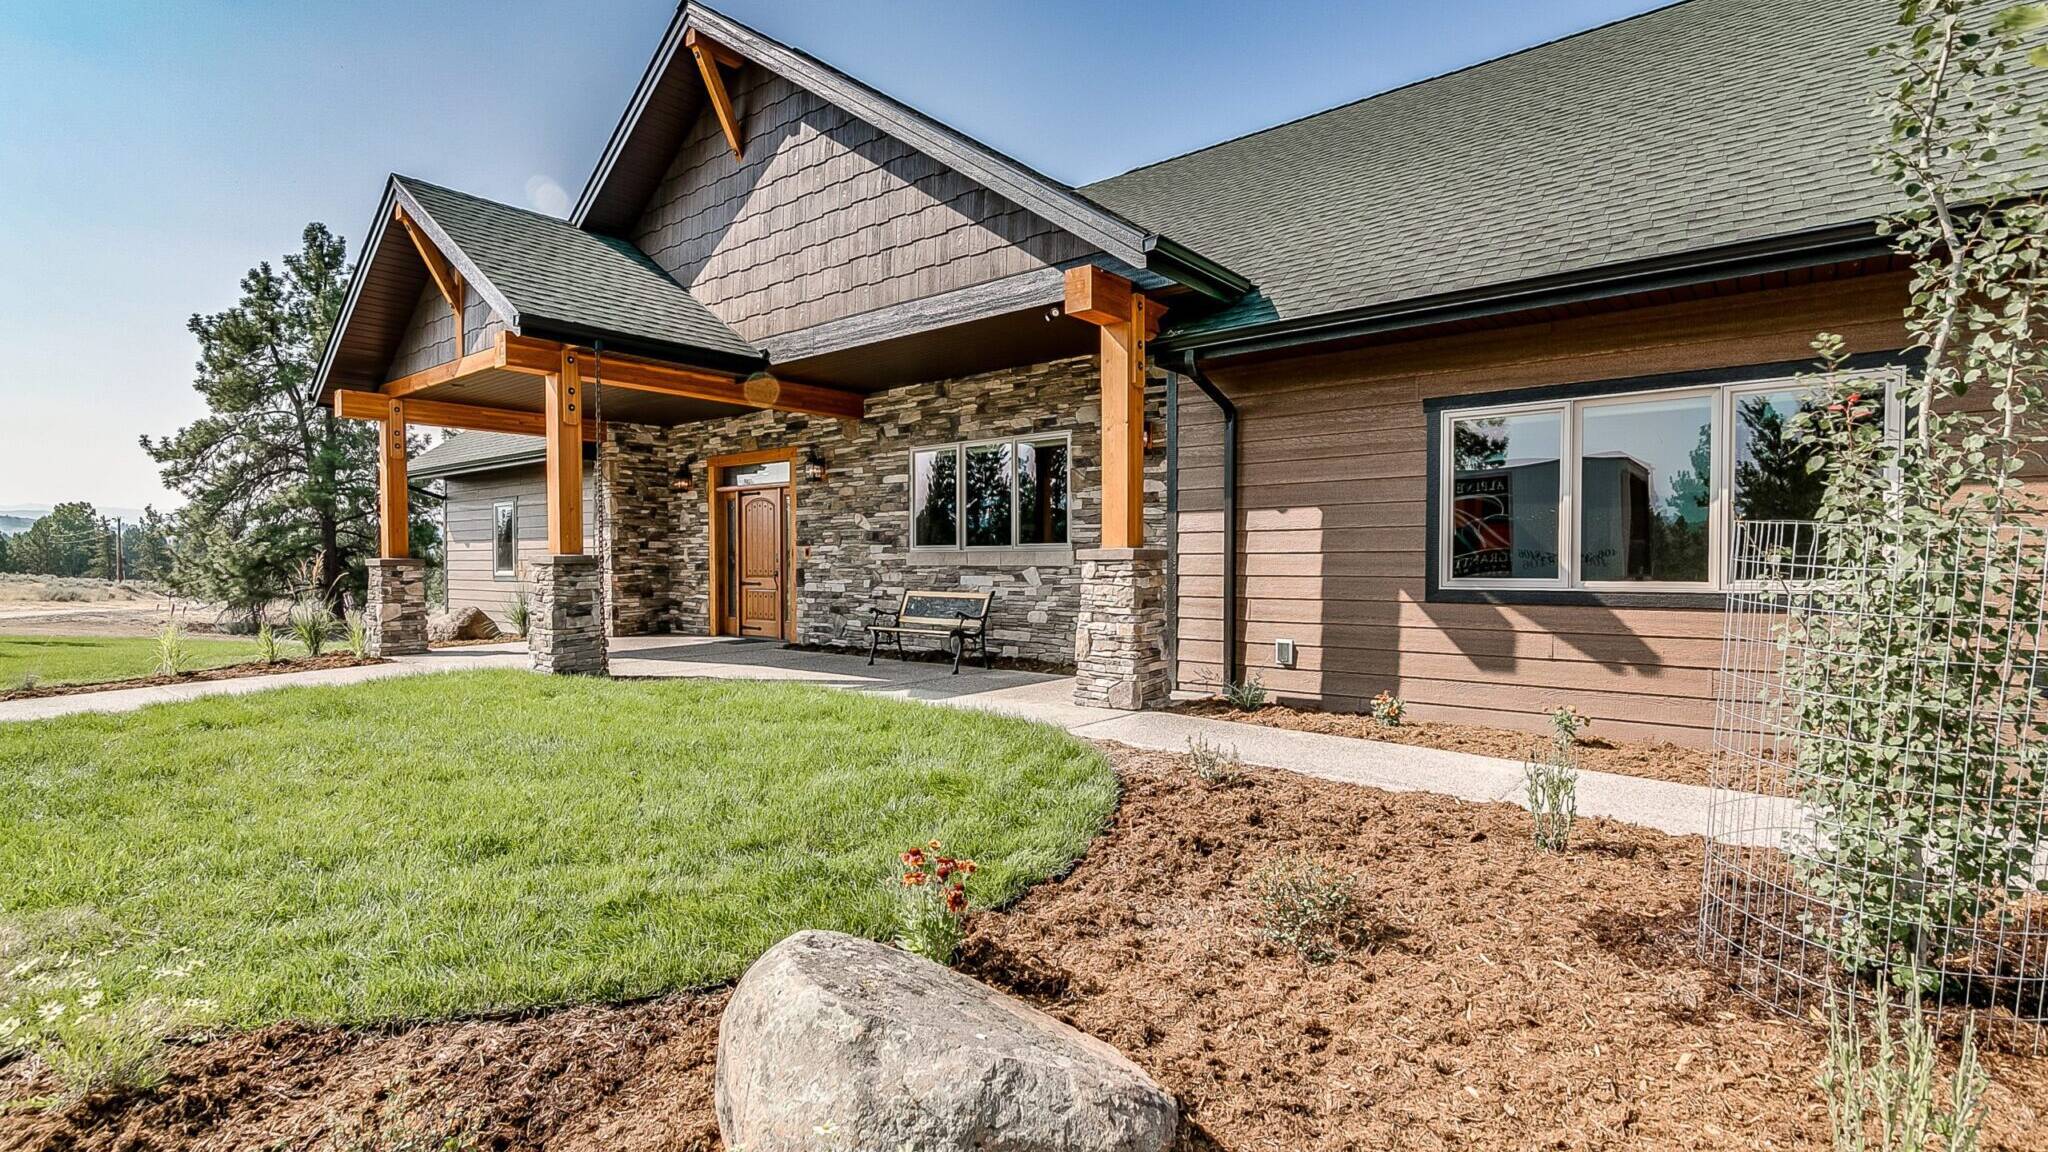 Front View of a custom home built by Big Sky Builders near Stevensville, Montana